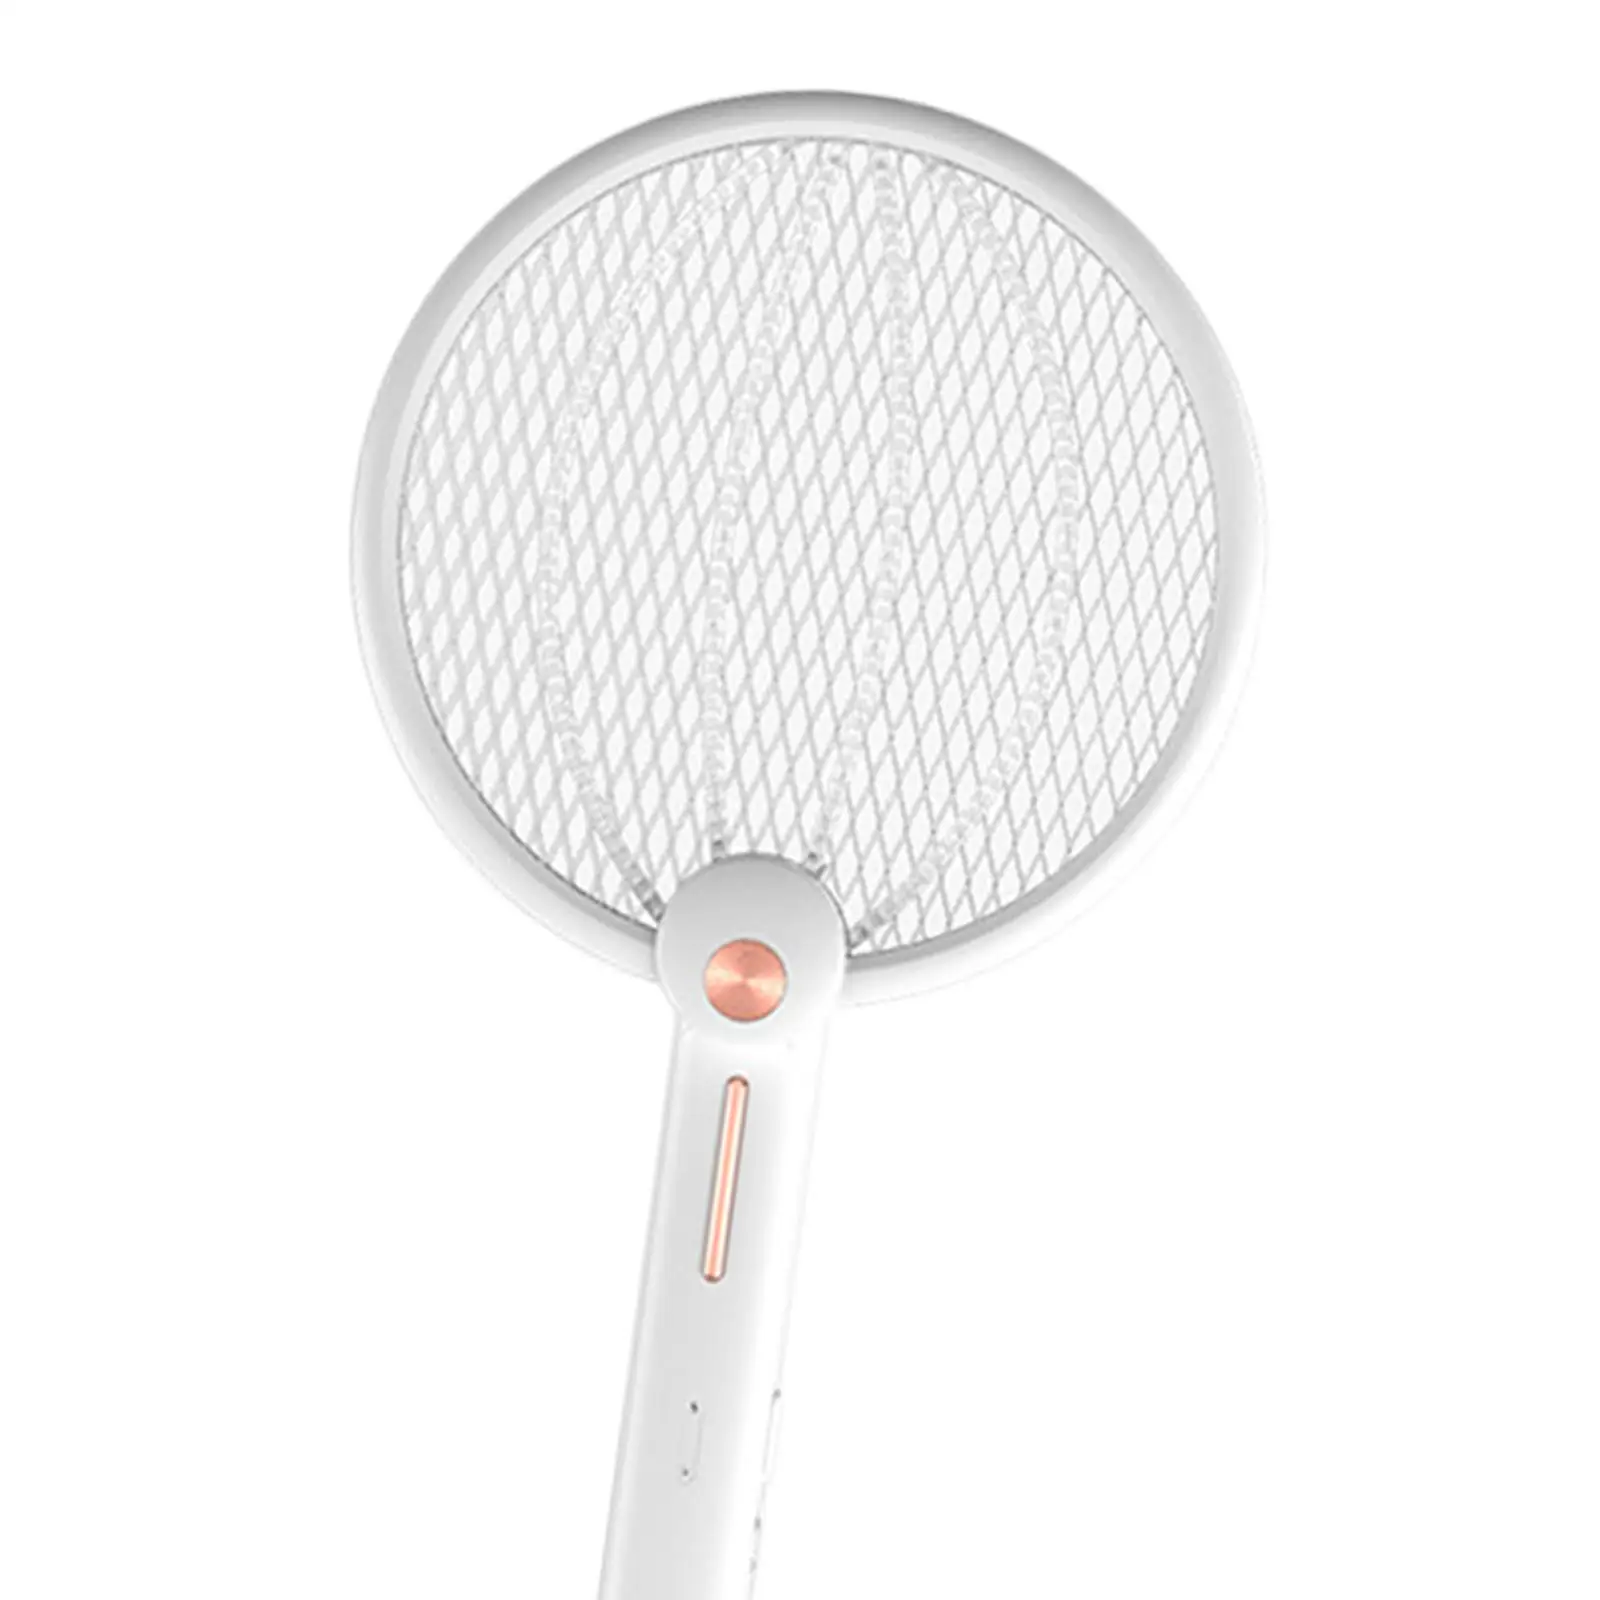 Fly traps Lamp with 3 mesh Handheld 2 in 1 USB Folding Electric Fly Swatter Racket for Summer Indoor Home Office Outdoor